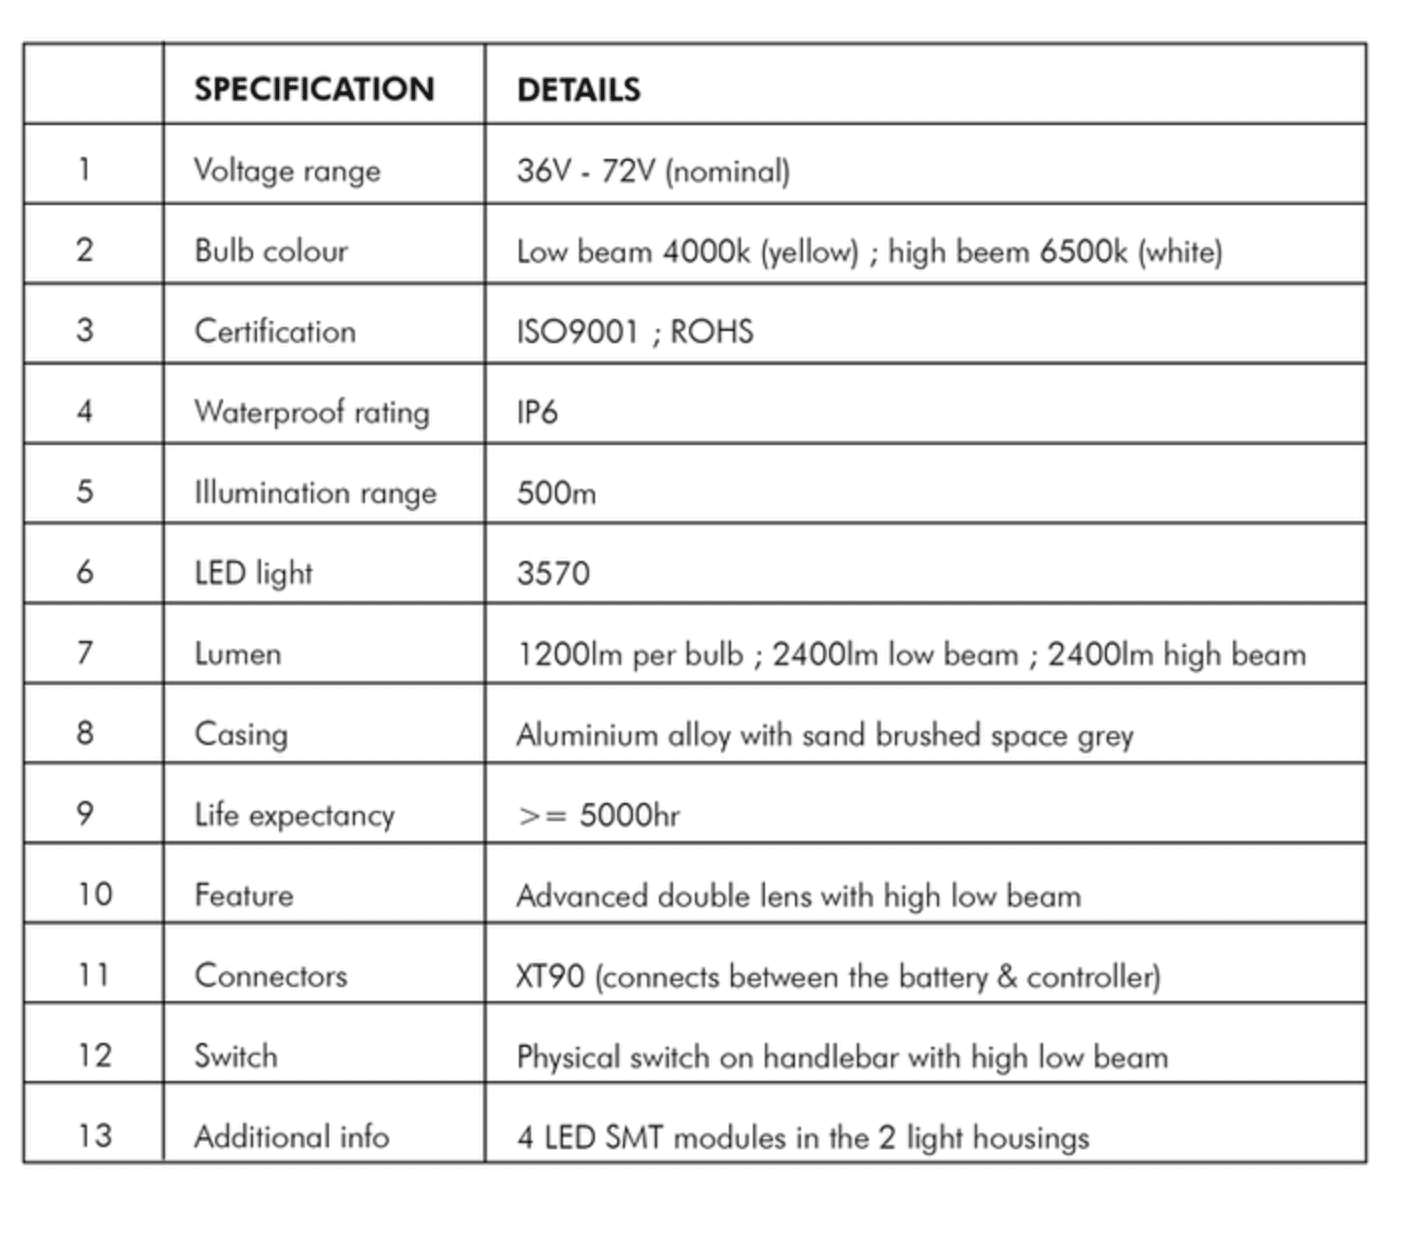 A table with the specifications for different led lights.